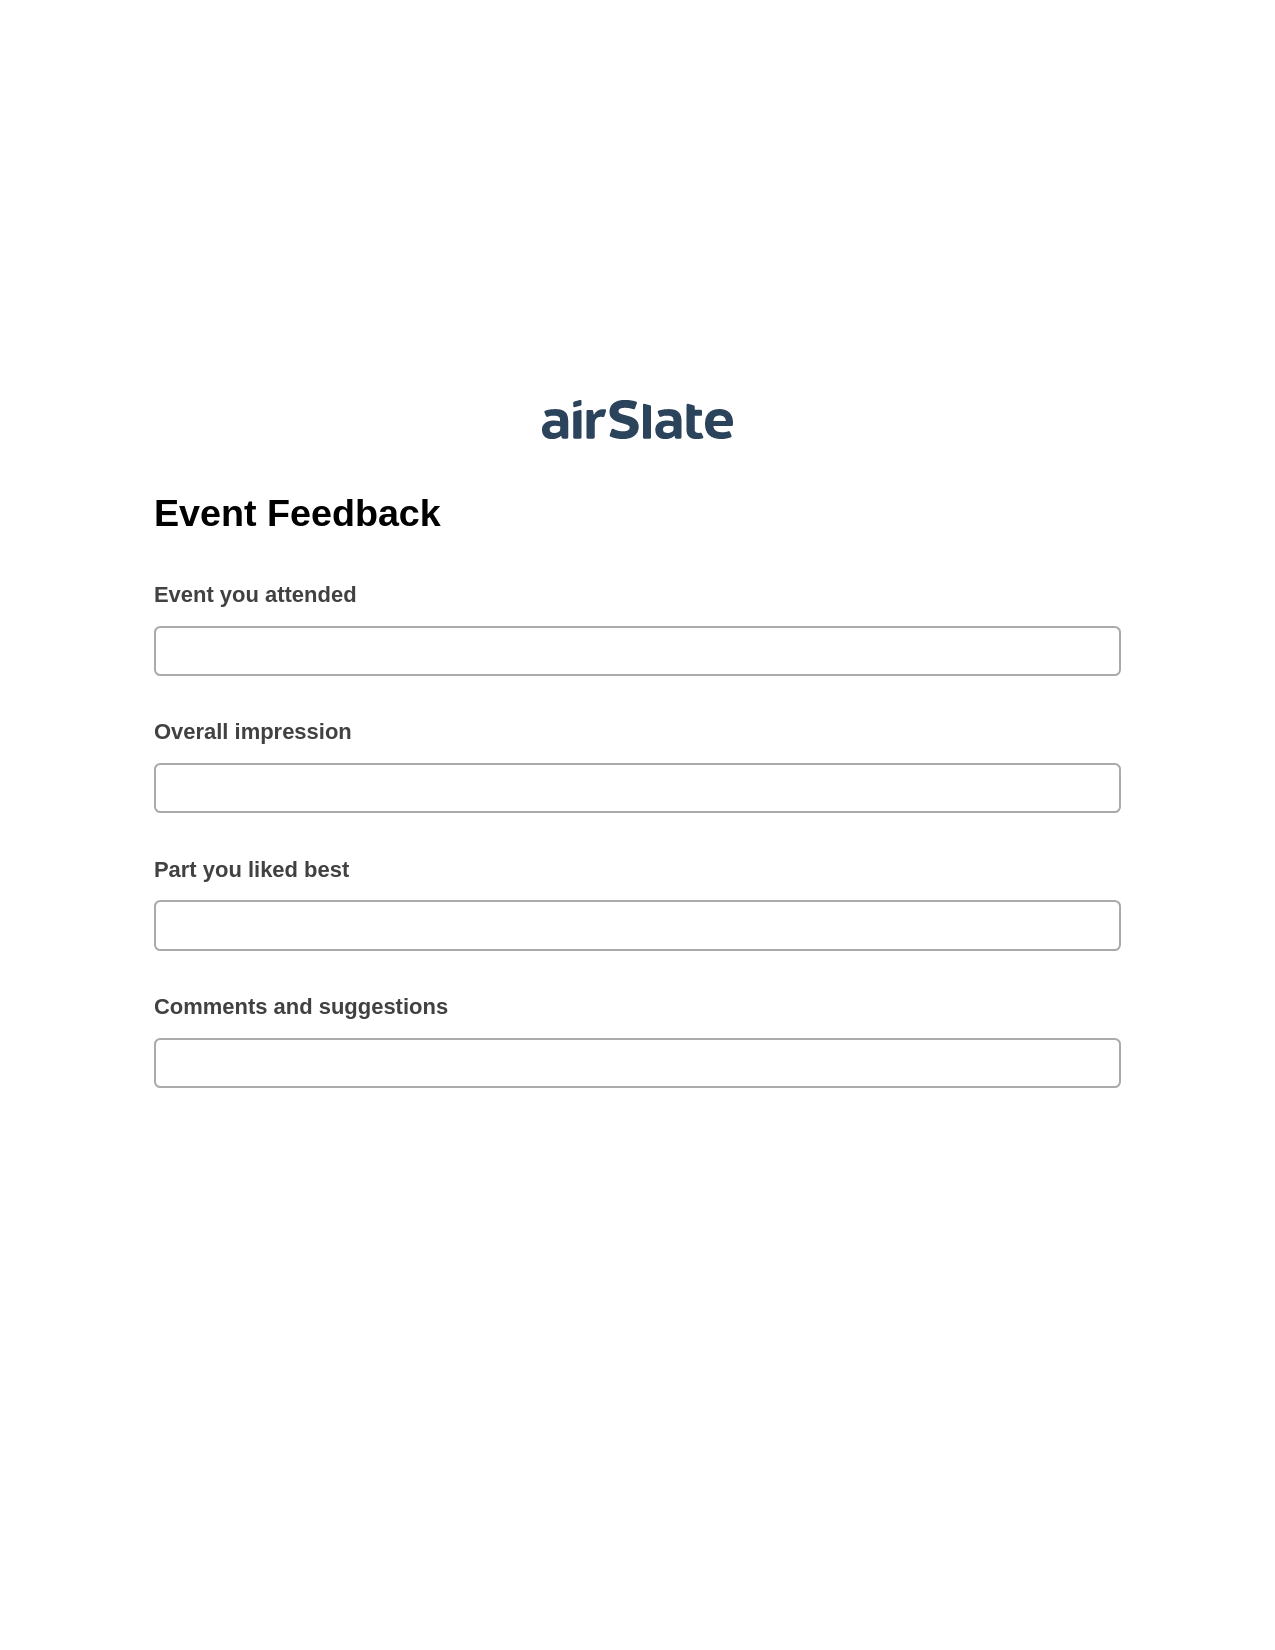 Event Feedback Pre-fill Document Bot, Assign Roles to Recipients Bot, Export to Excel 365 Bot